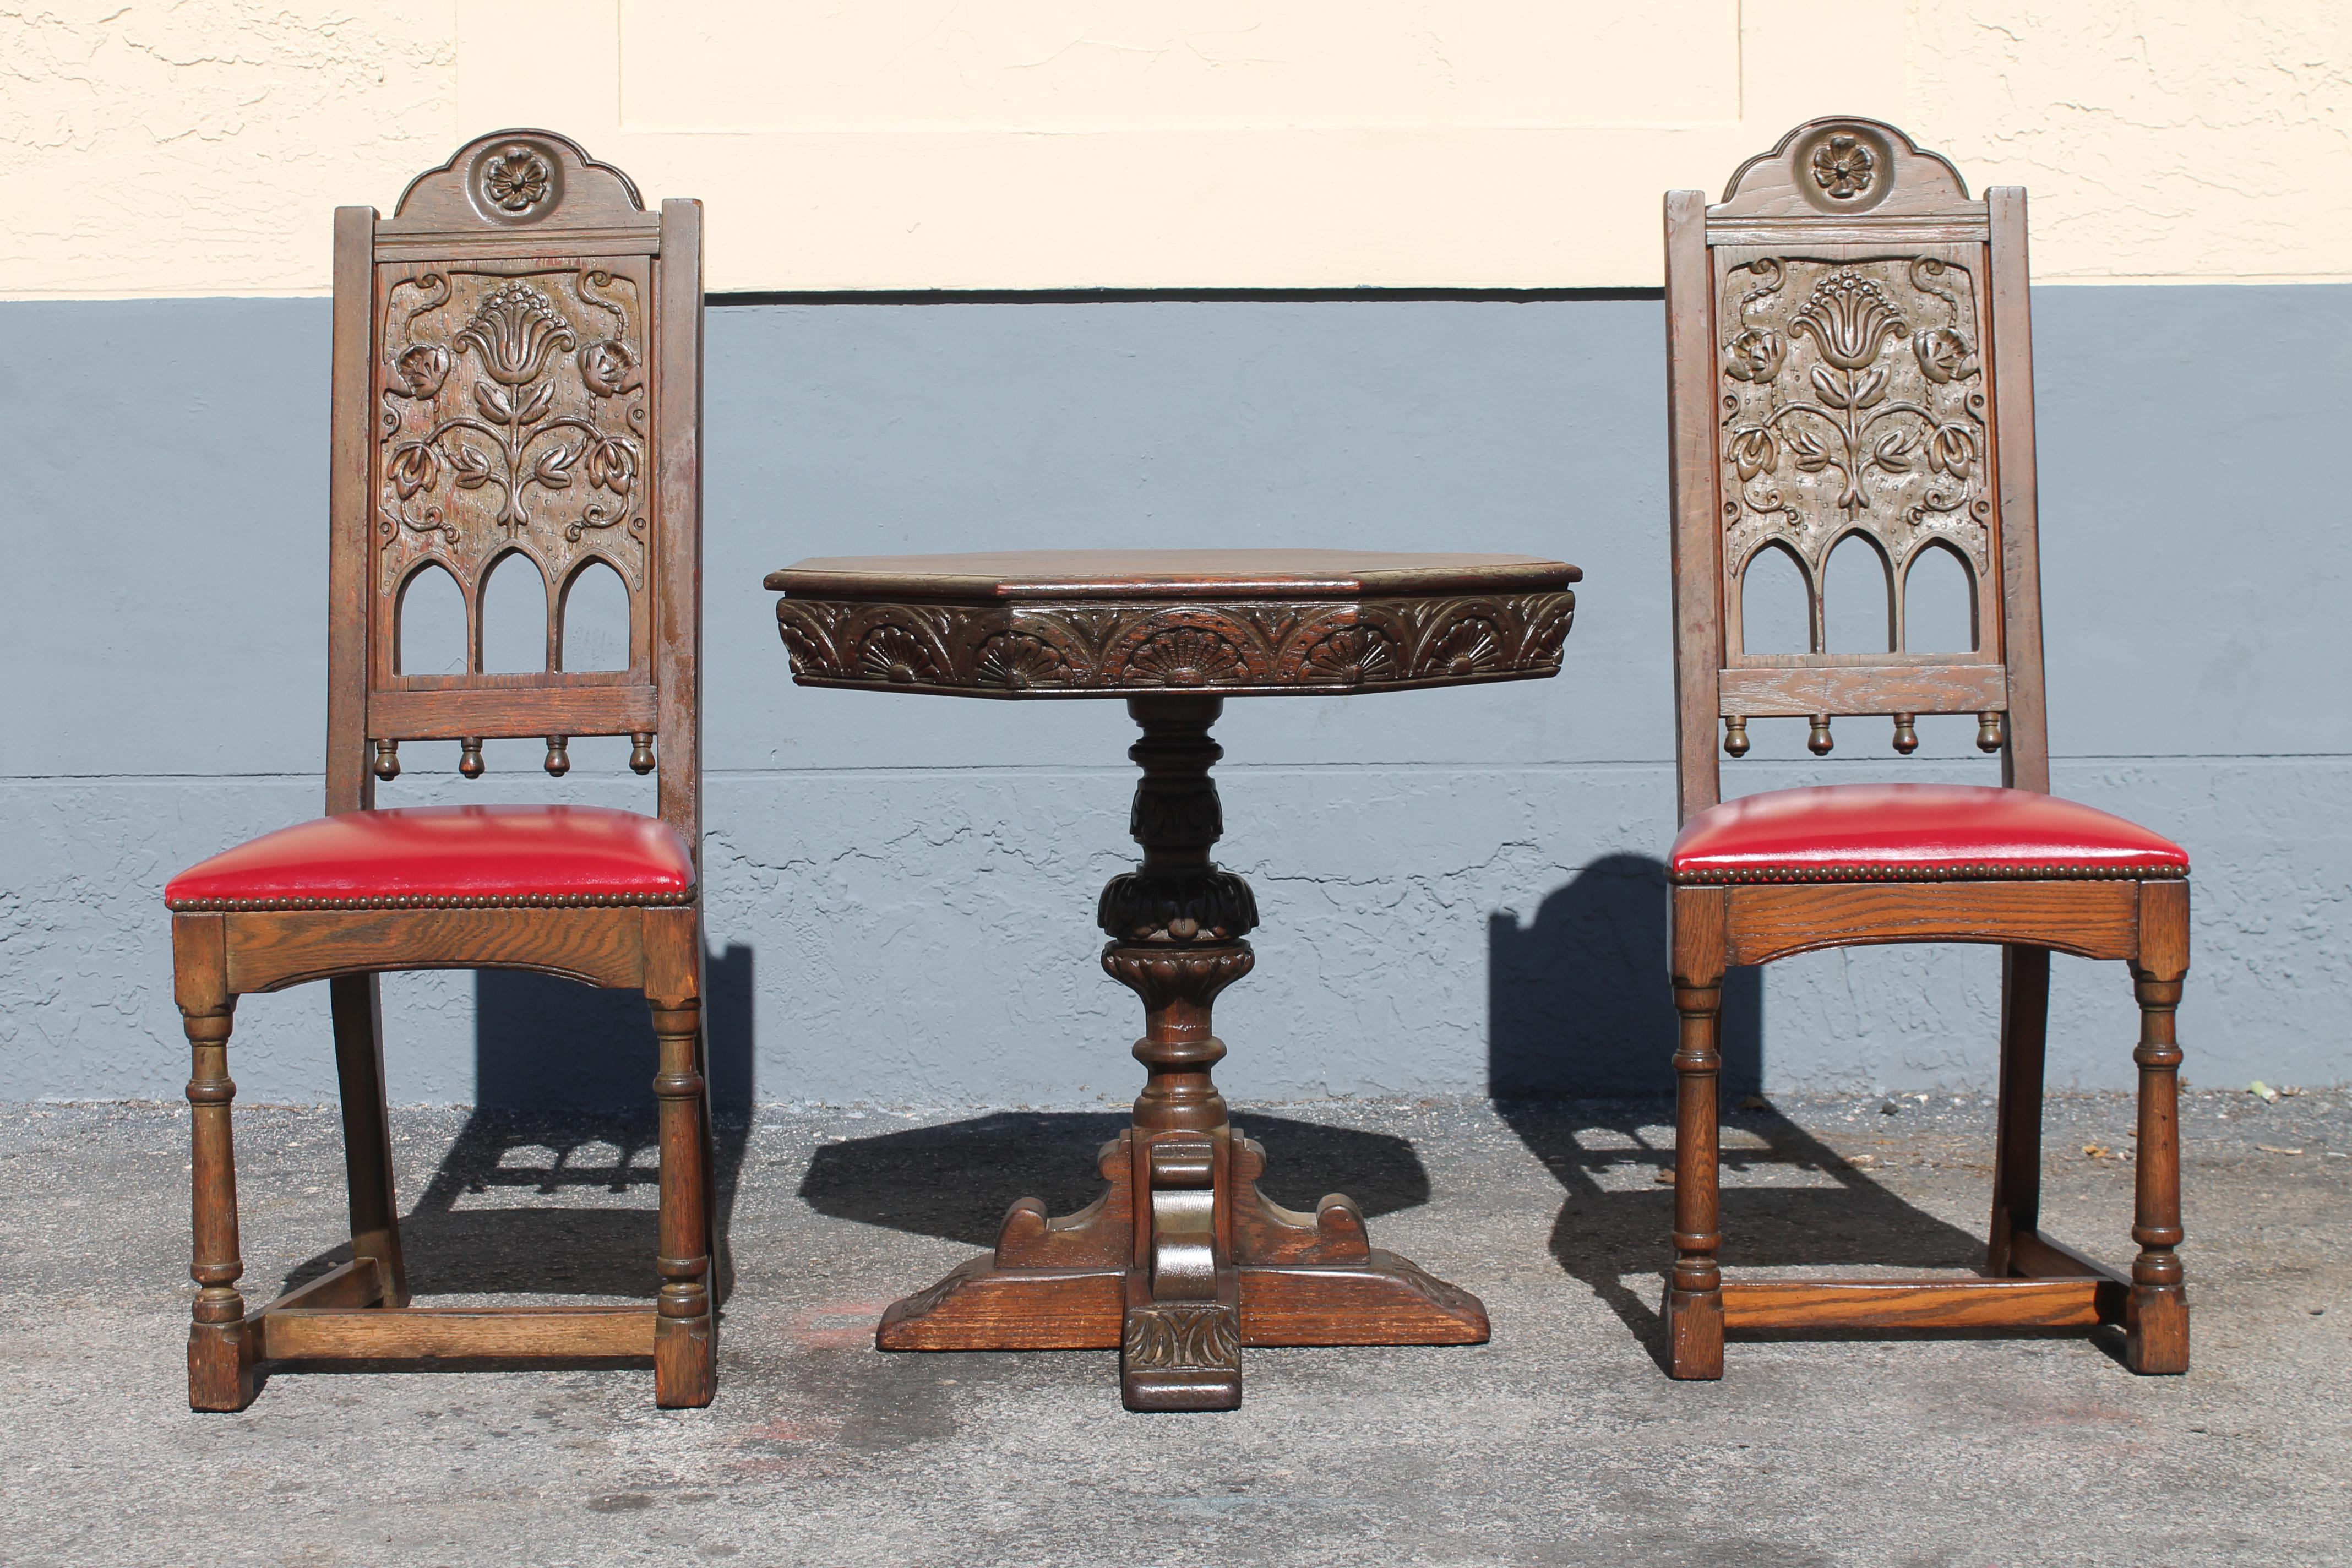 19thc French Rennaisance Revival Oak Tea Table Set. 3 pieces, 1 tea table and Pair of matching Chairs. The dimensions of the chairs are 44.5